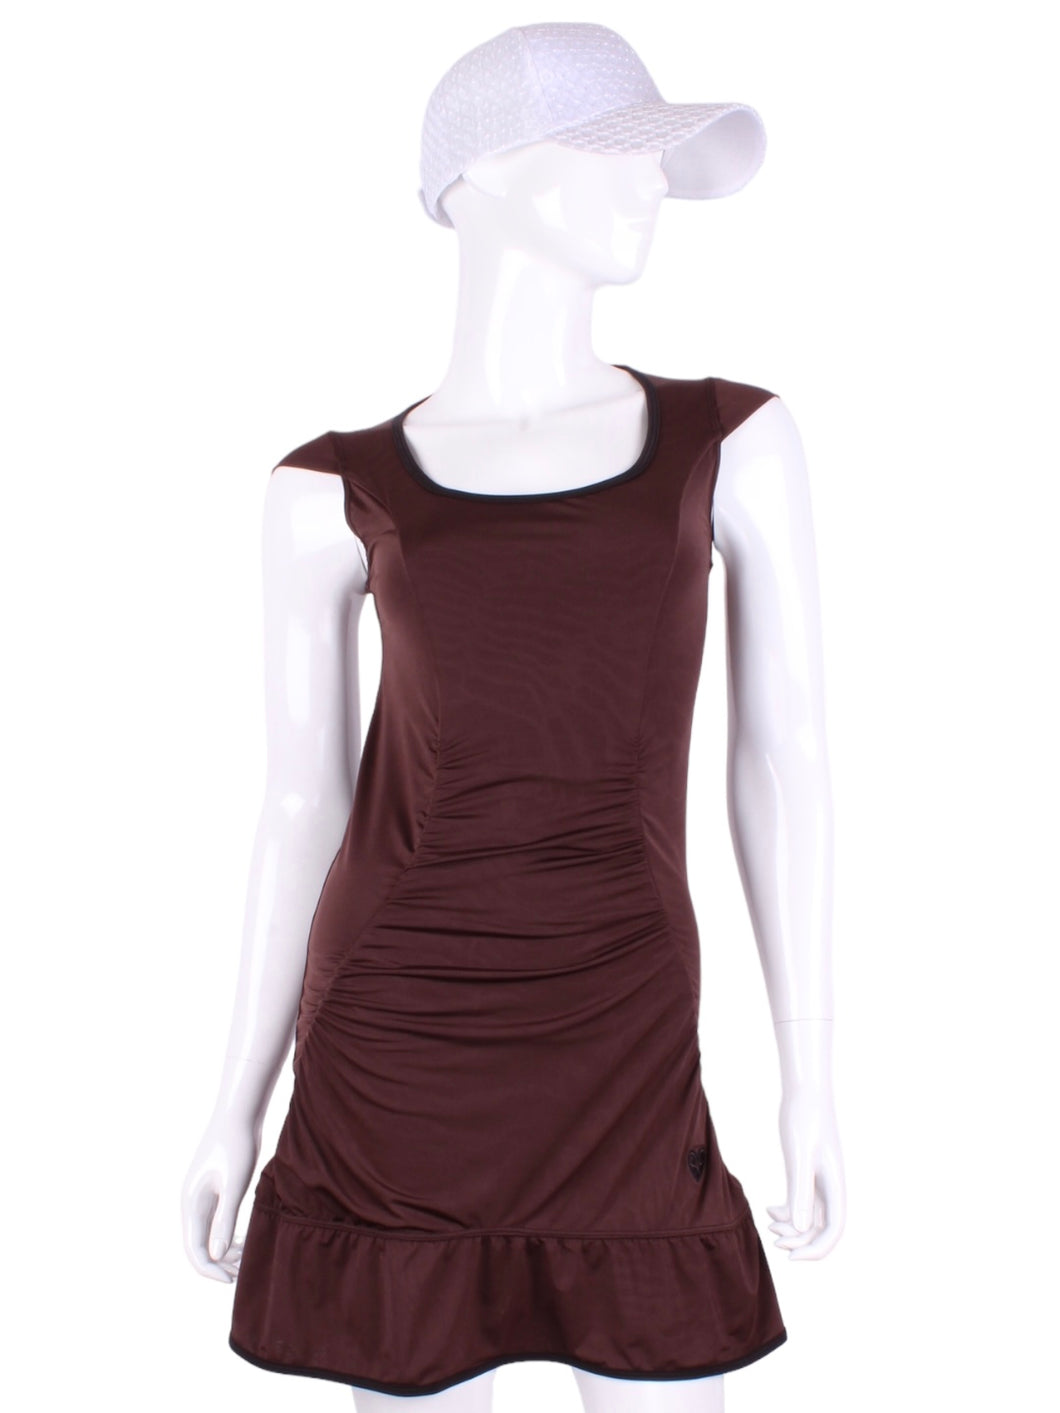 The Monroe Dress delicately shows your feminine curves. It is a fitted dress, until the bottom where there is a cute ruffle. These Brown pieces are very limited edition - only one made per size.